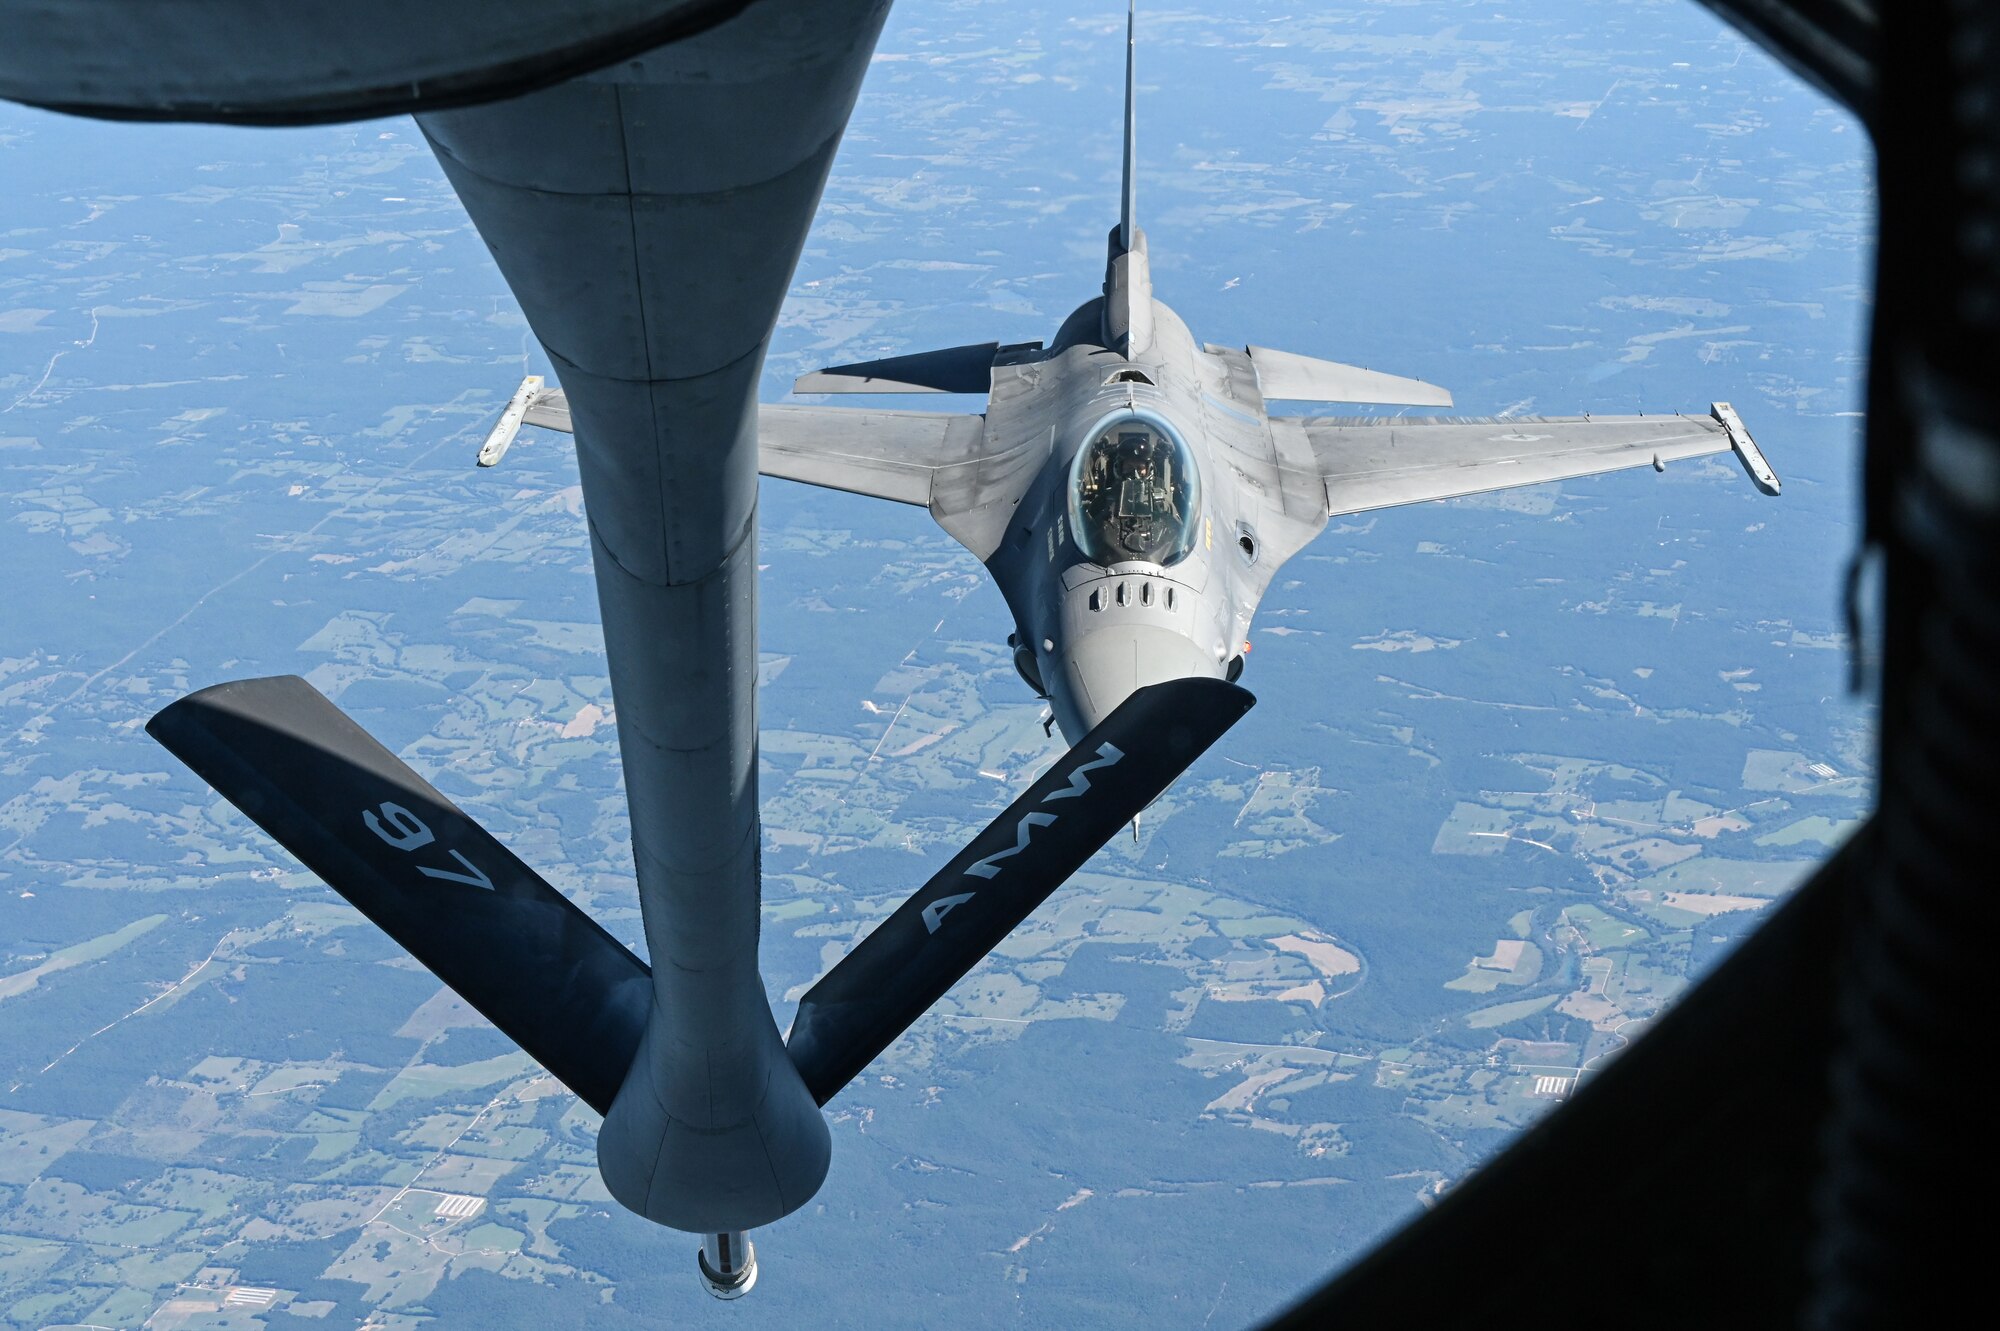 An F-16 Fighting Falcon from Shaw Air Force Base (AFB), South Carolina, receives fuel from a KC-135 Stratotanker from Altus AFB, Oklahoma, Sept. 29, 2022. A second F-16 is flown with the Viper Demonstration Team as a spare if the main F-16 Viper is unable to fly. (U.S. Air Force photo by Senior Airman Kayla Christenson)